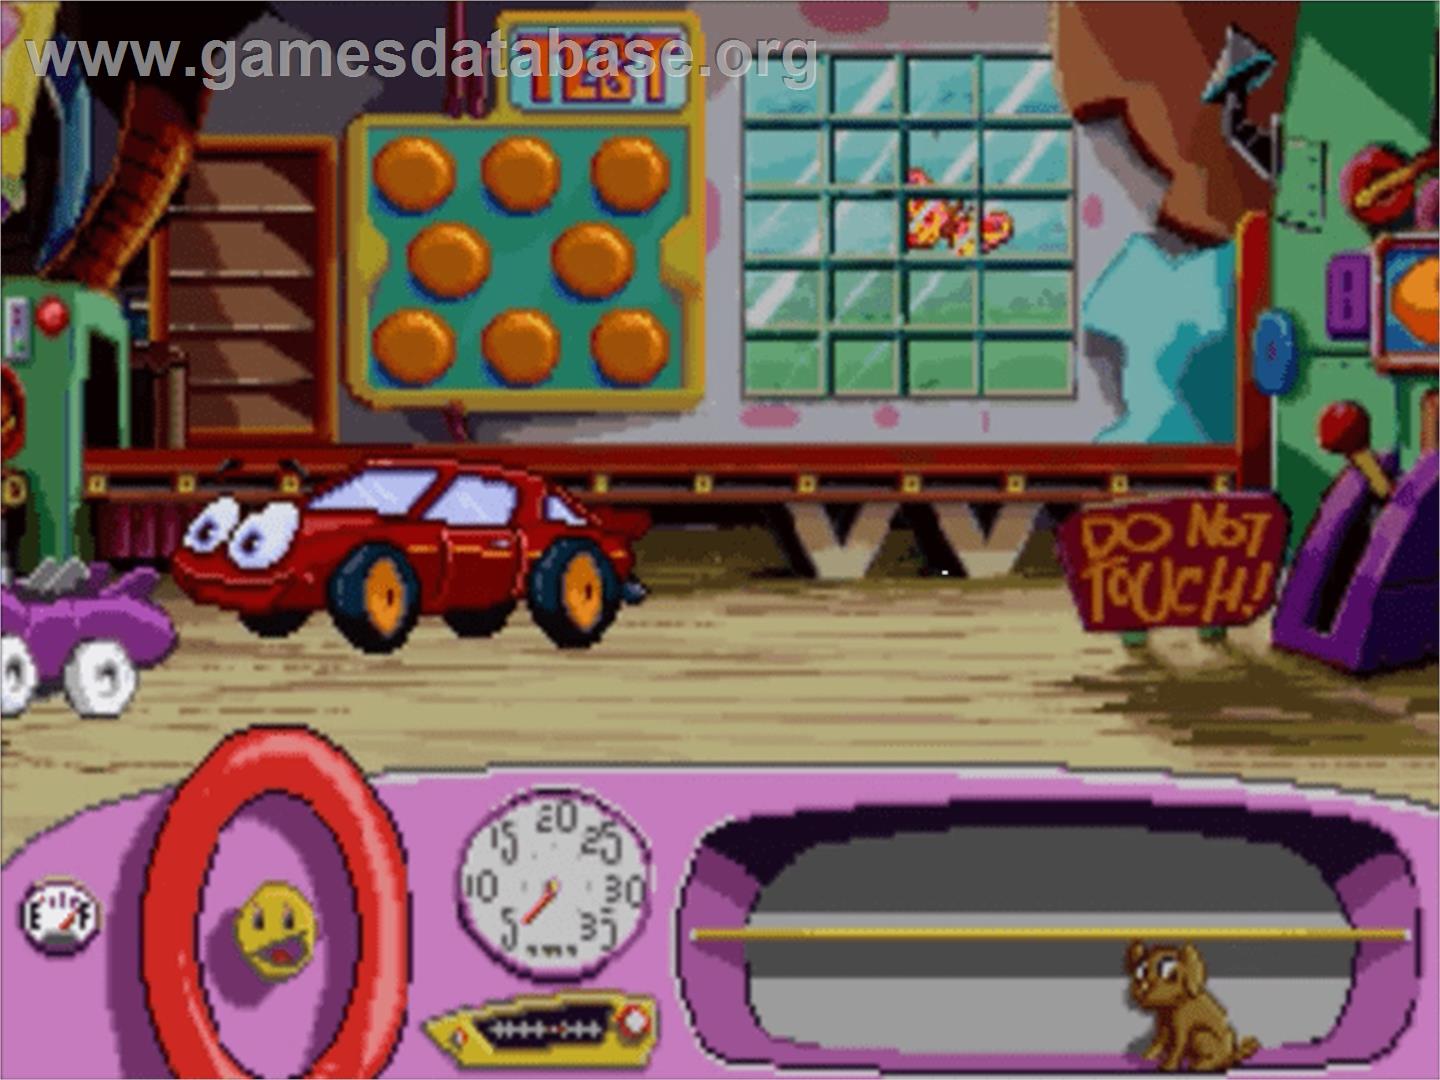 Putt-Putt Goes to the Moon - Panasonic 3DO - Artwork - In Game